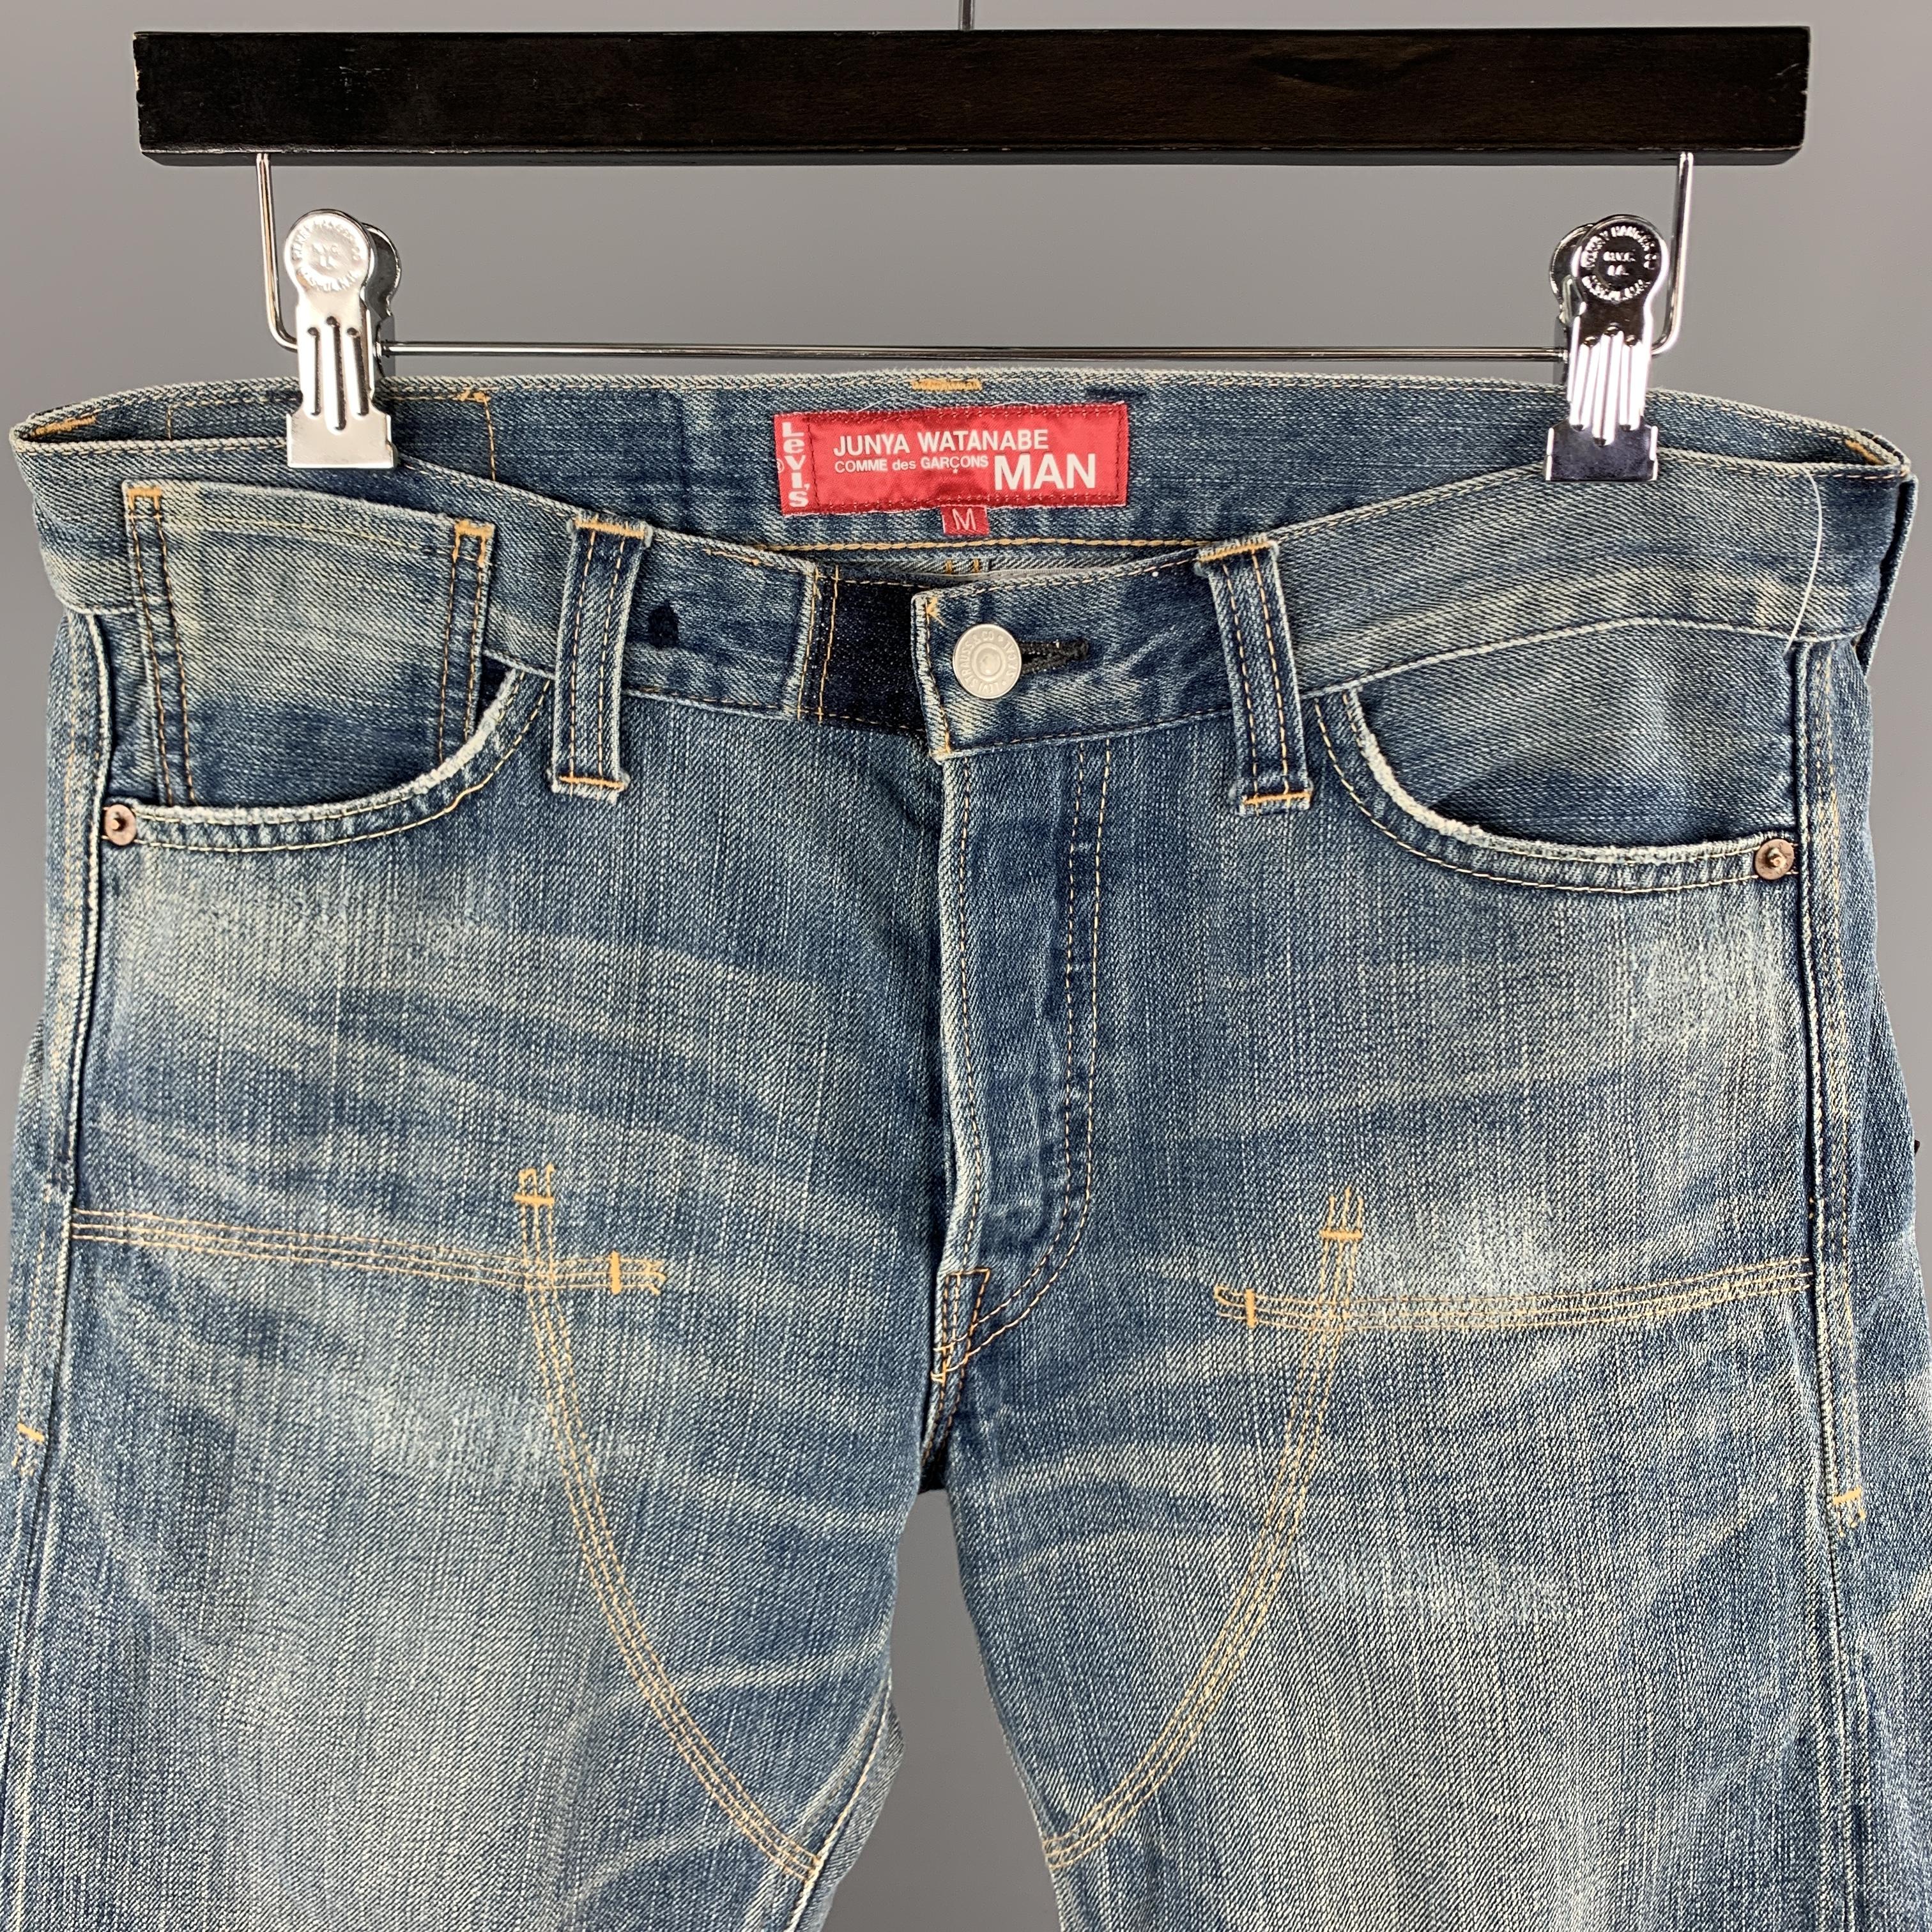 JUNYA WATANABE COMME des GARCONS MAN x LEVI'S jeans comes in a light blue washed selvedge denim featuring stitching details, camouflage trim liner, and a button fly closure. AD2010. Made in Japan.
 

Excellent Pre-Owned Condition.
Marked: